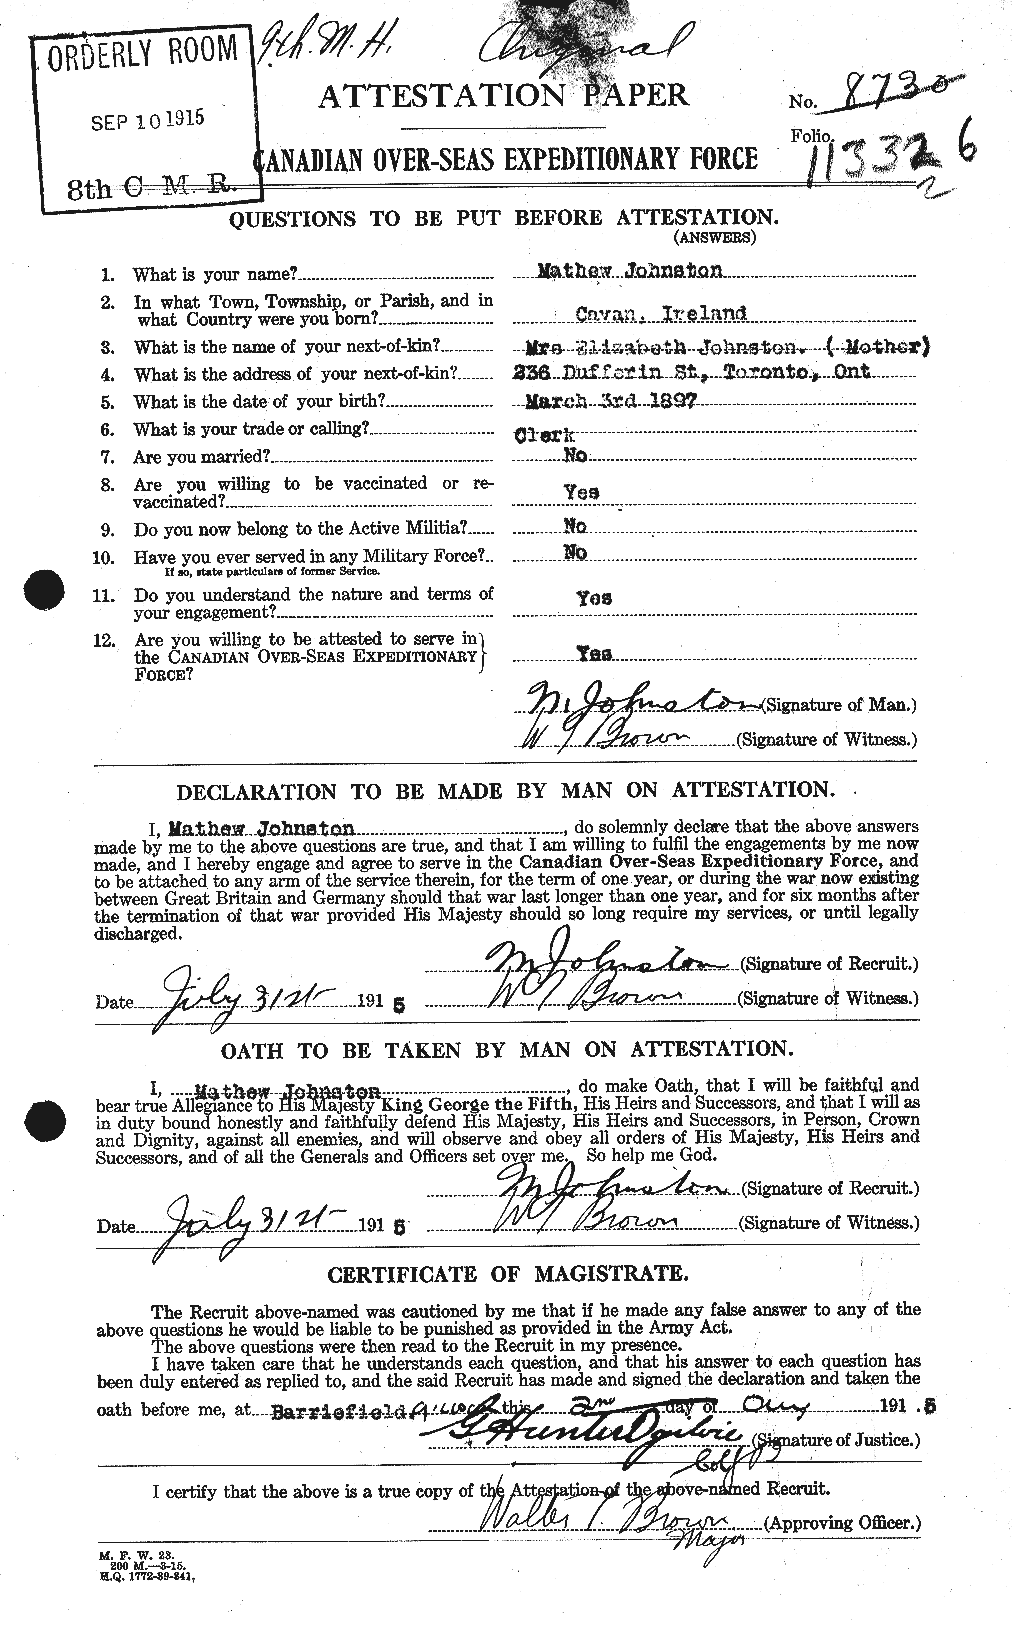 Personnel Records of the First World War - CEF 422977a